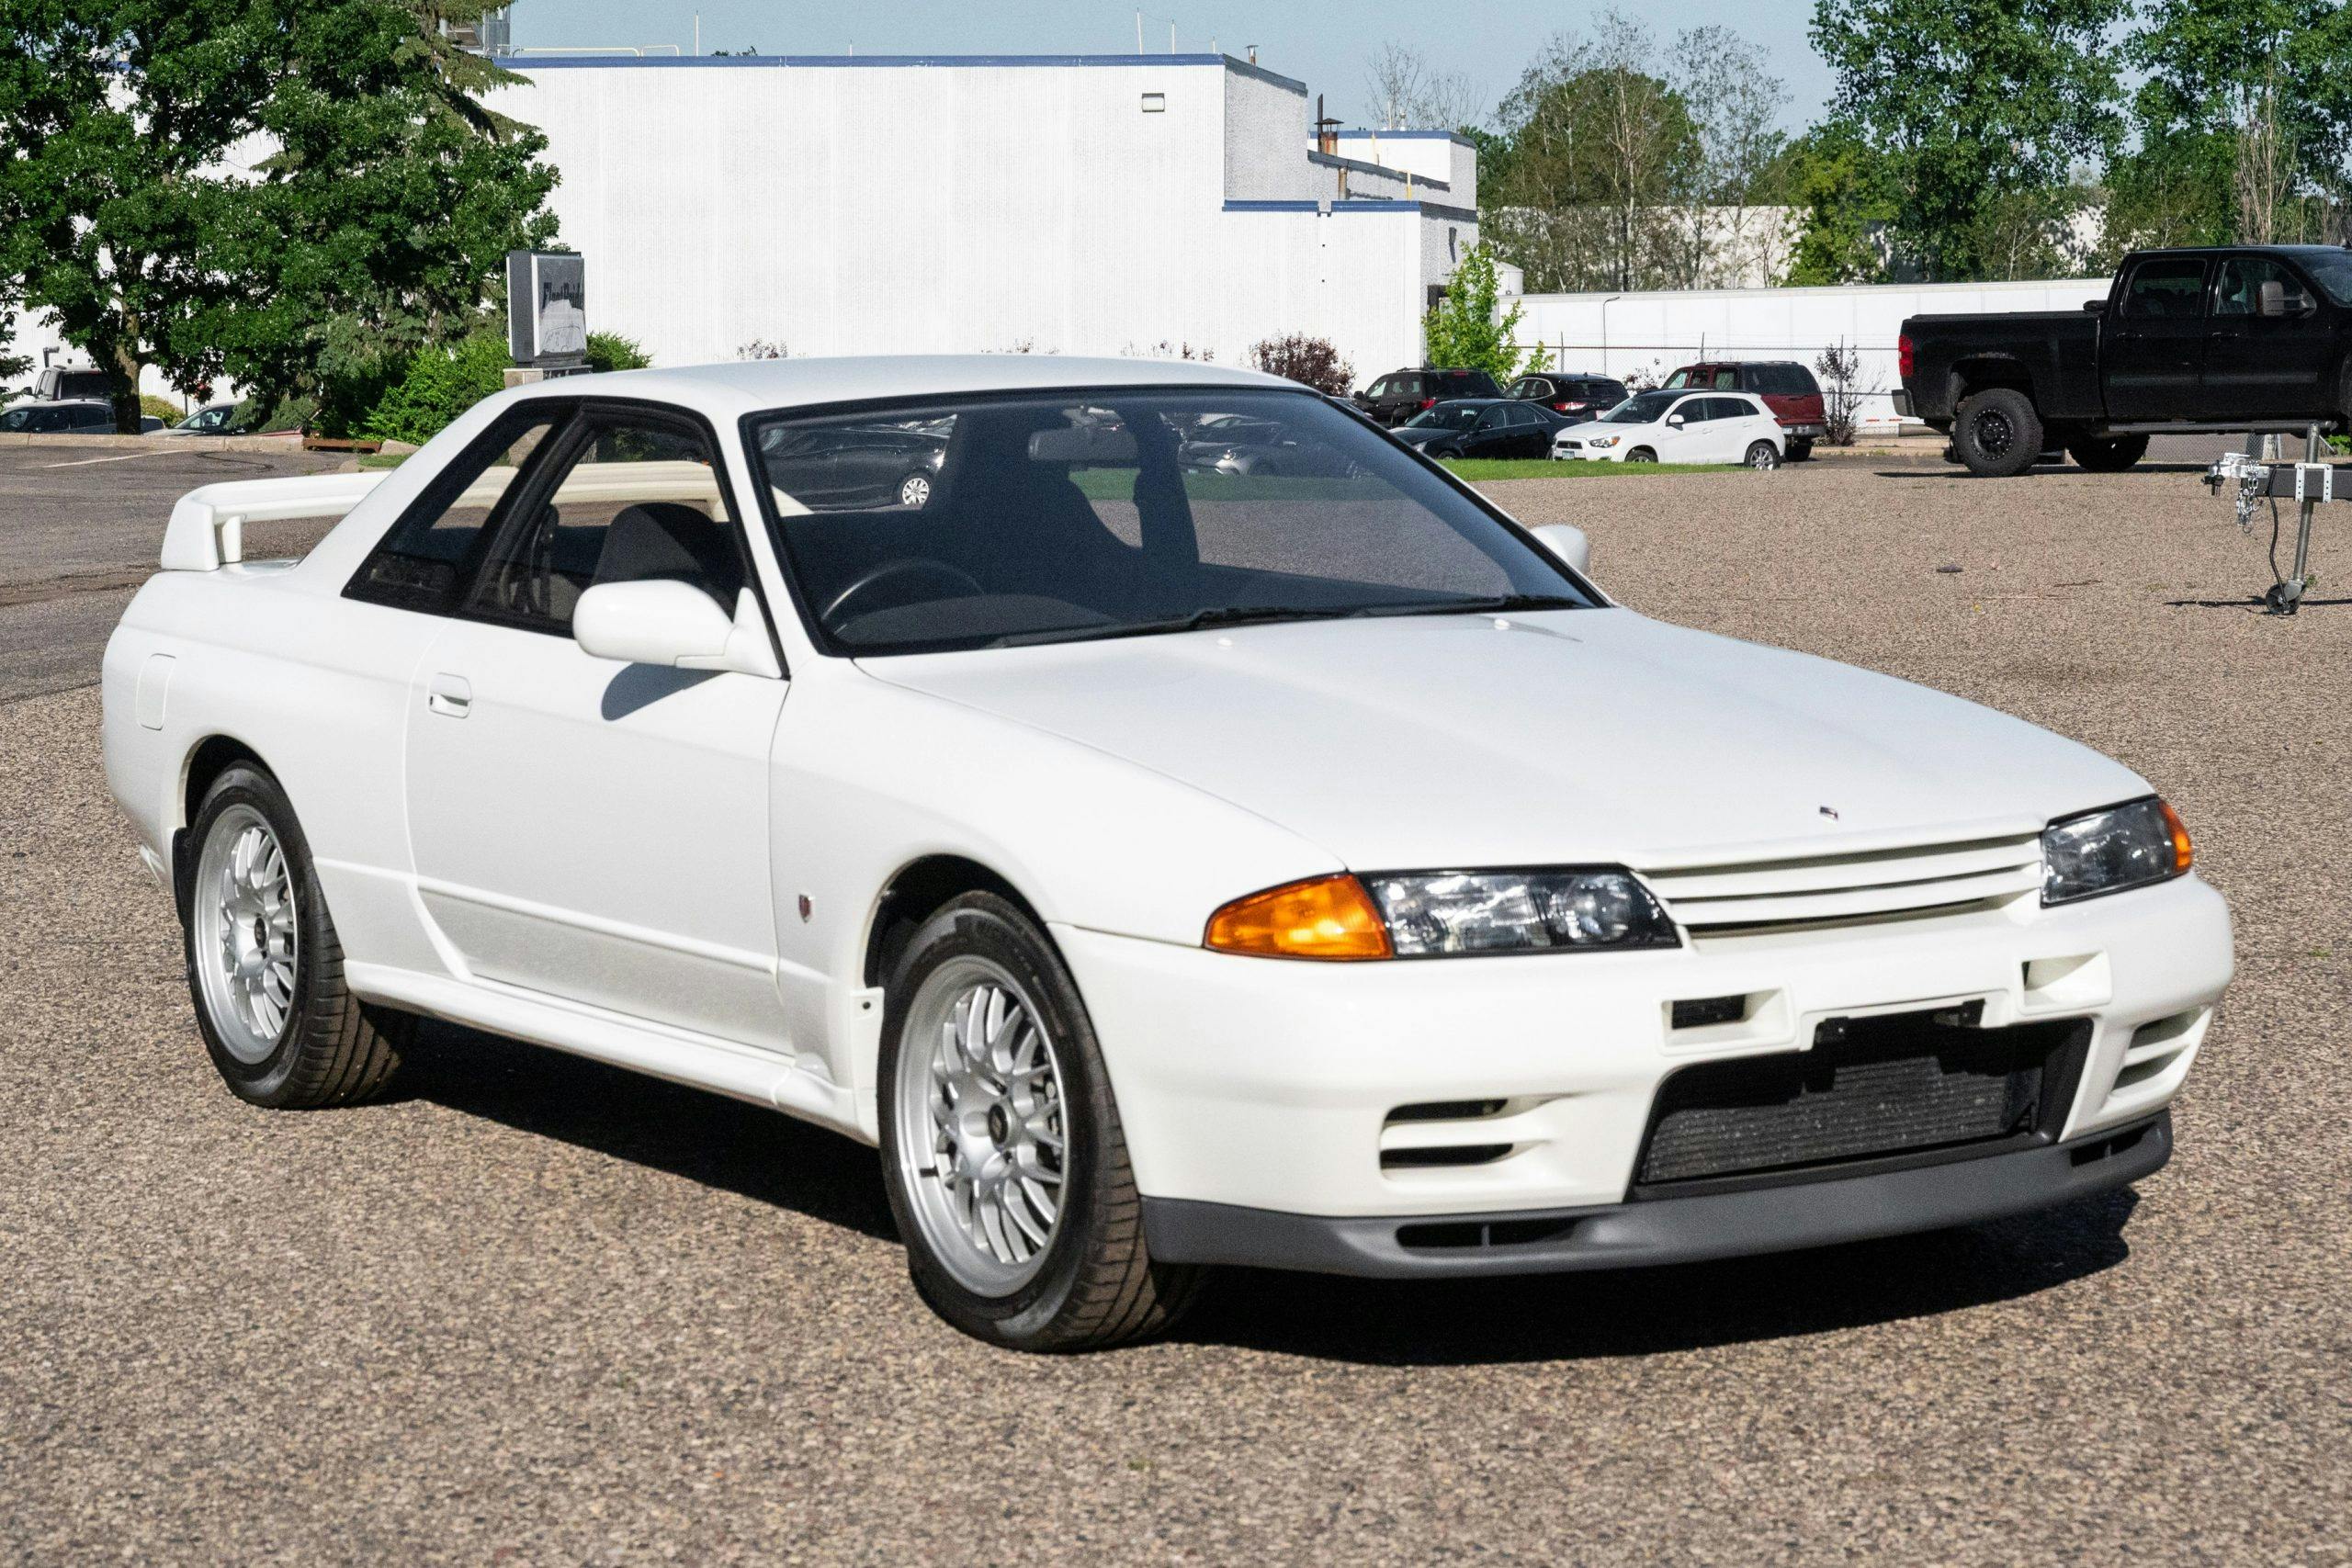 R32 GT-R V-Spec N1 is a track-prepped JDM unicorn - Hagerty Media